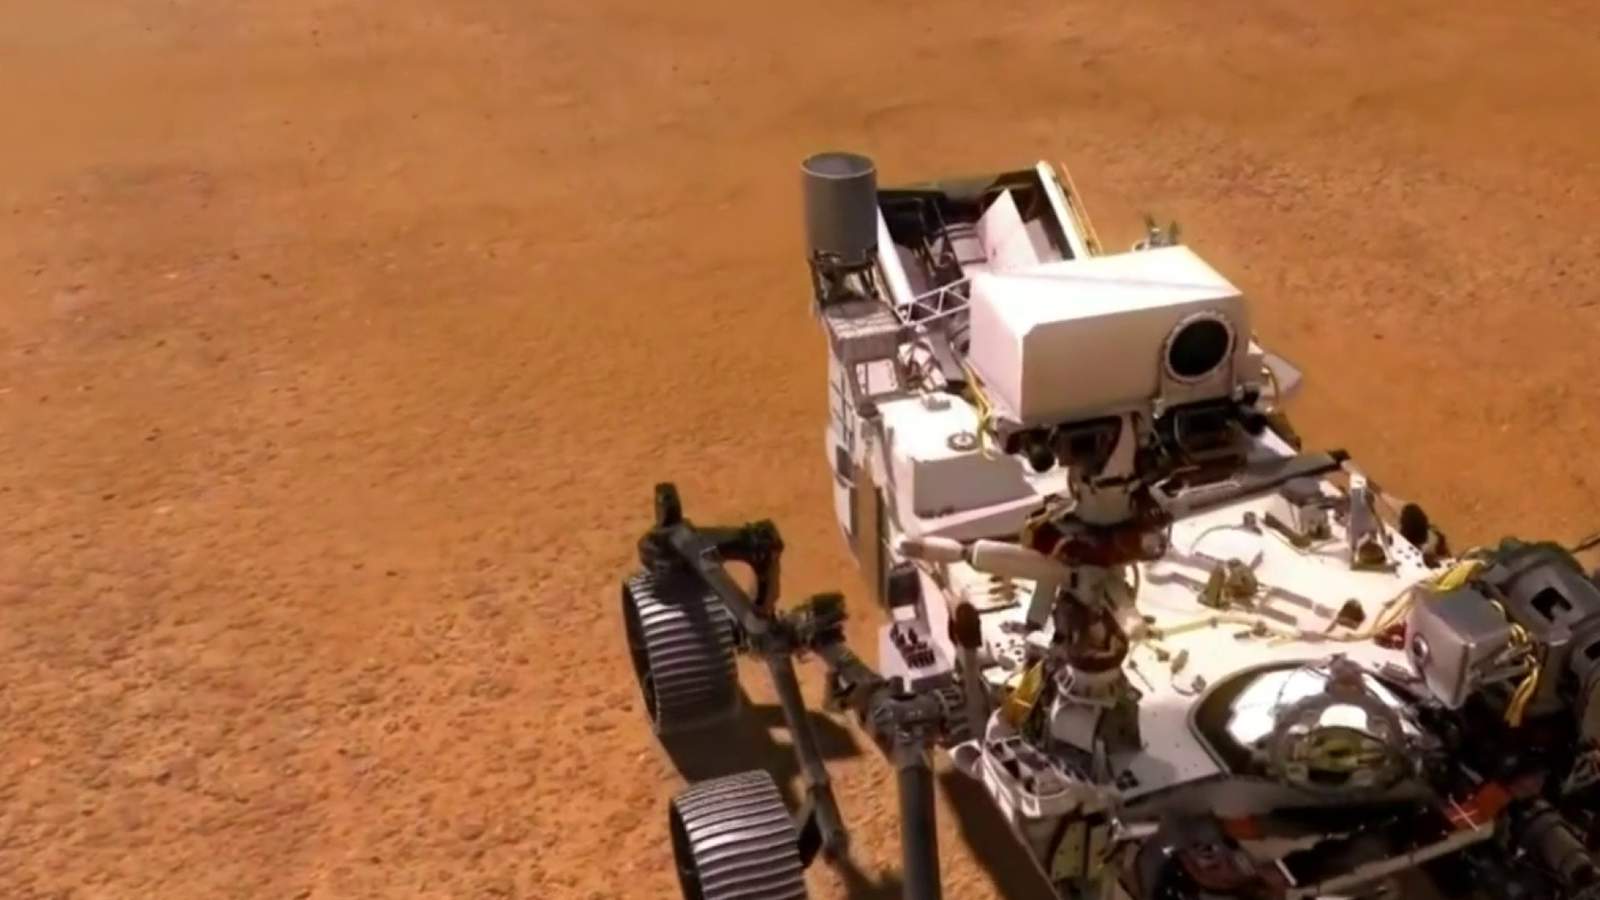 Perseverance rover heads to Mars: Heres what to know